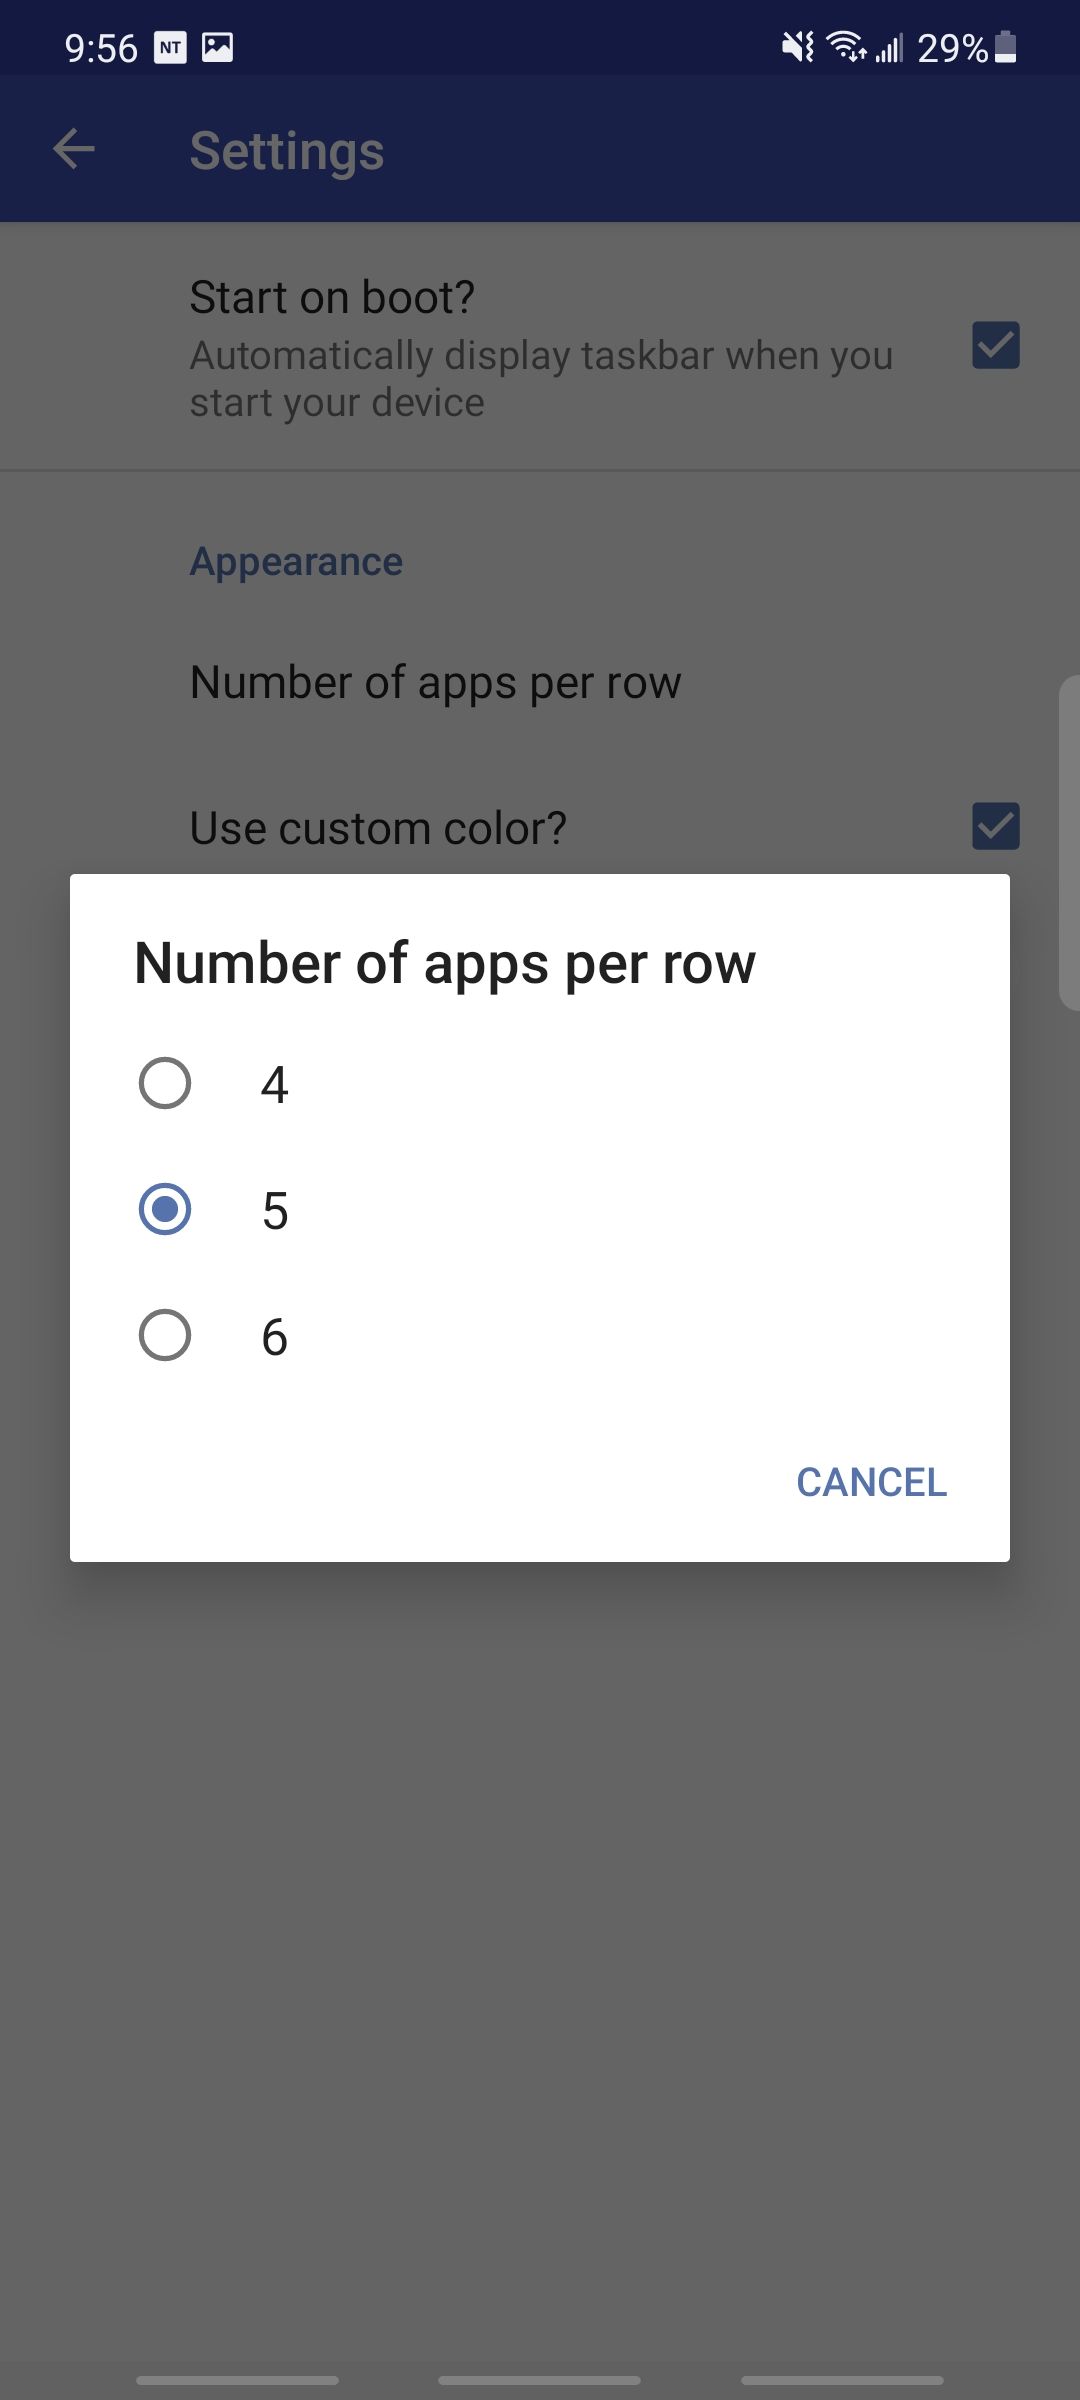 notification taskbar setting the number of apps per row